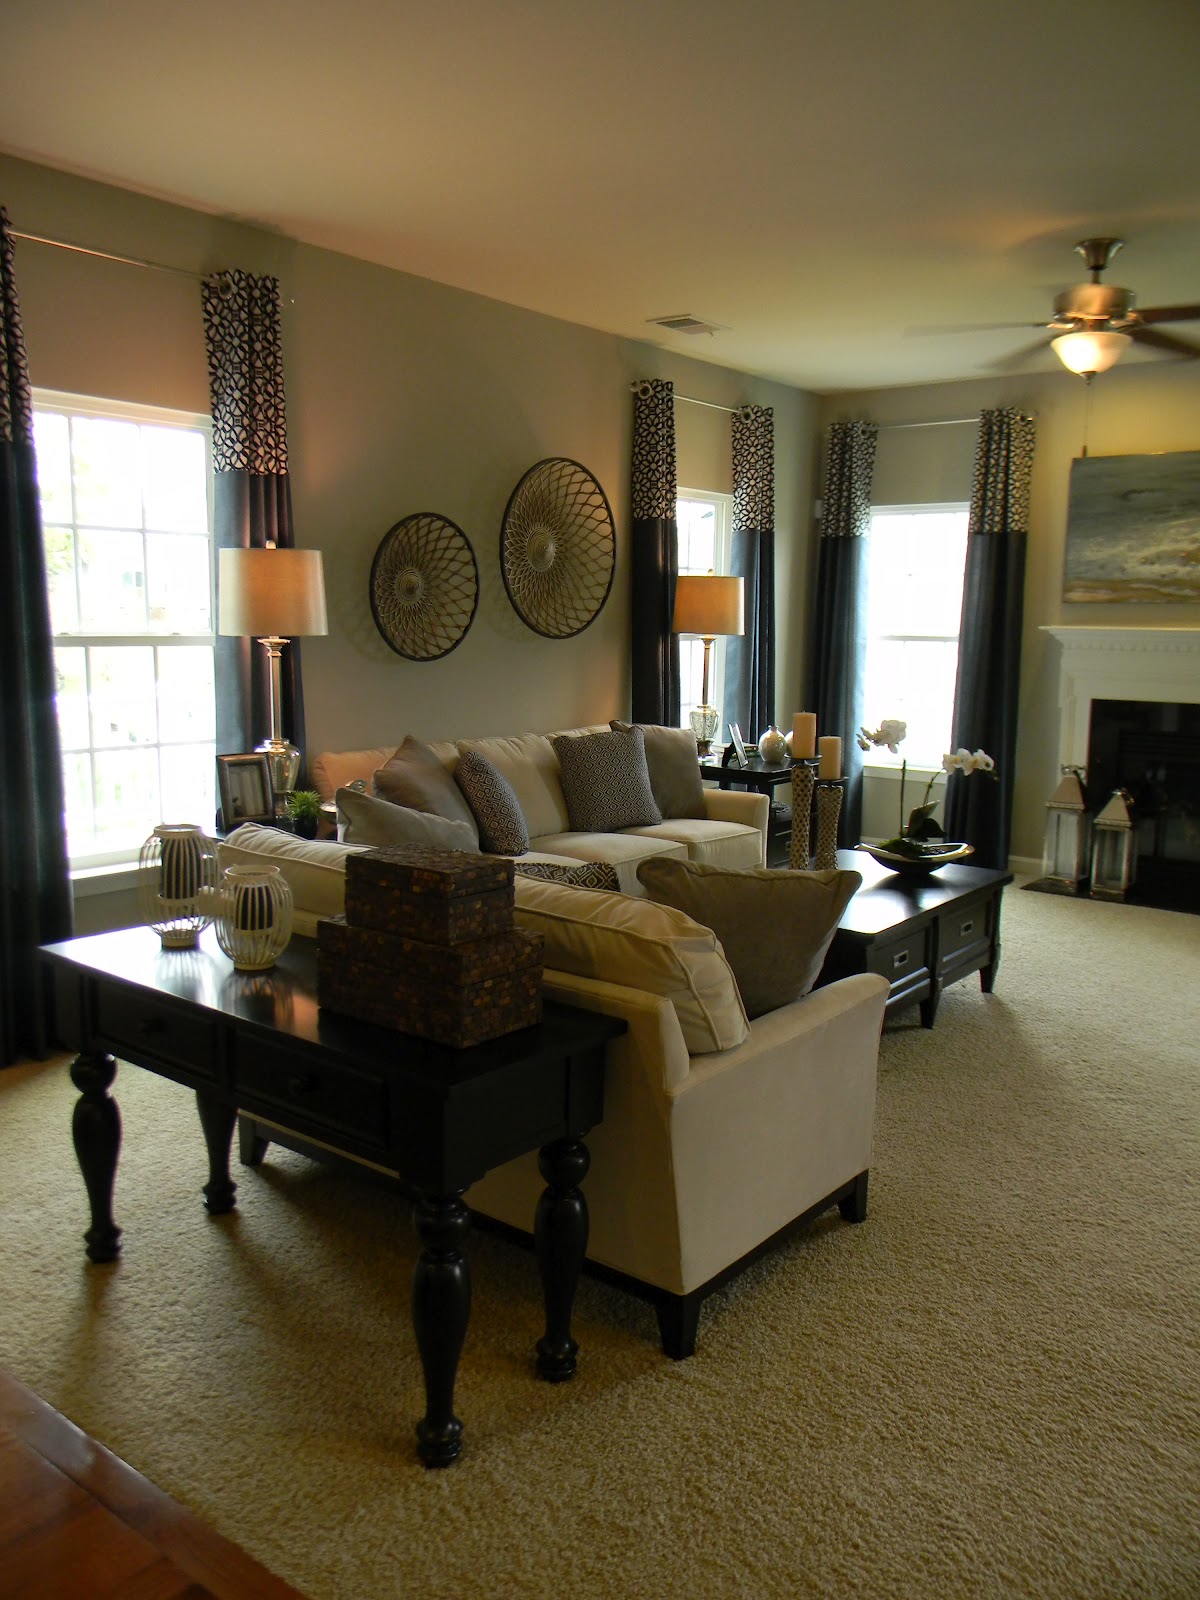 Seaside Interiors: Stopping by the Model Home!!!